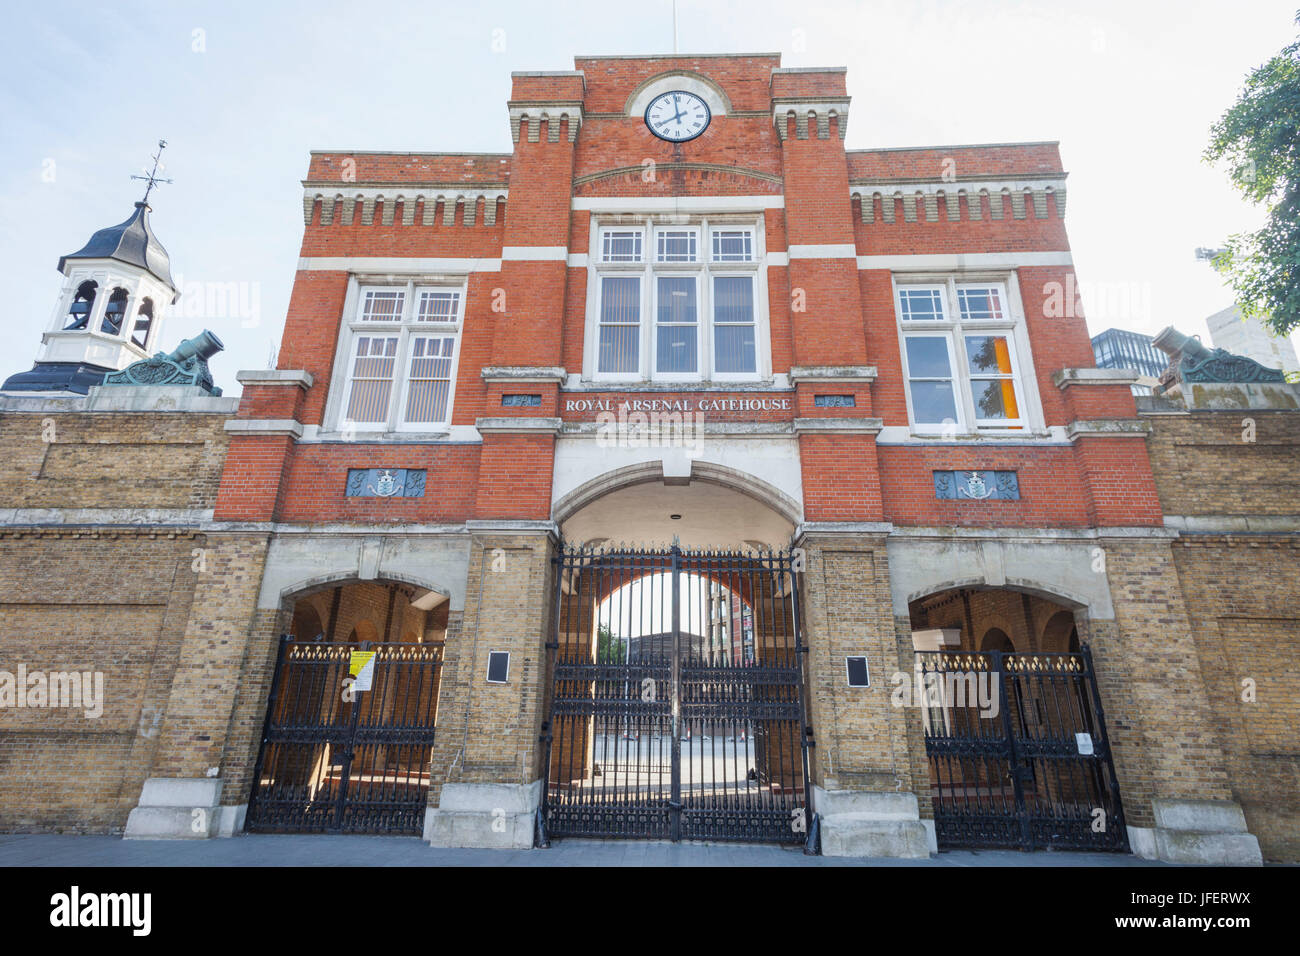 L'Angleterre, Londres, Royal, Woolwich Arsenal Gatehouse Banque D'Images